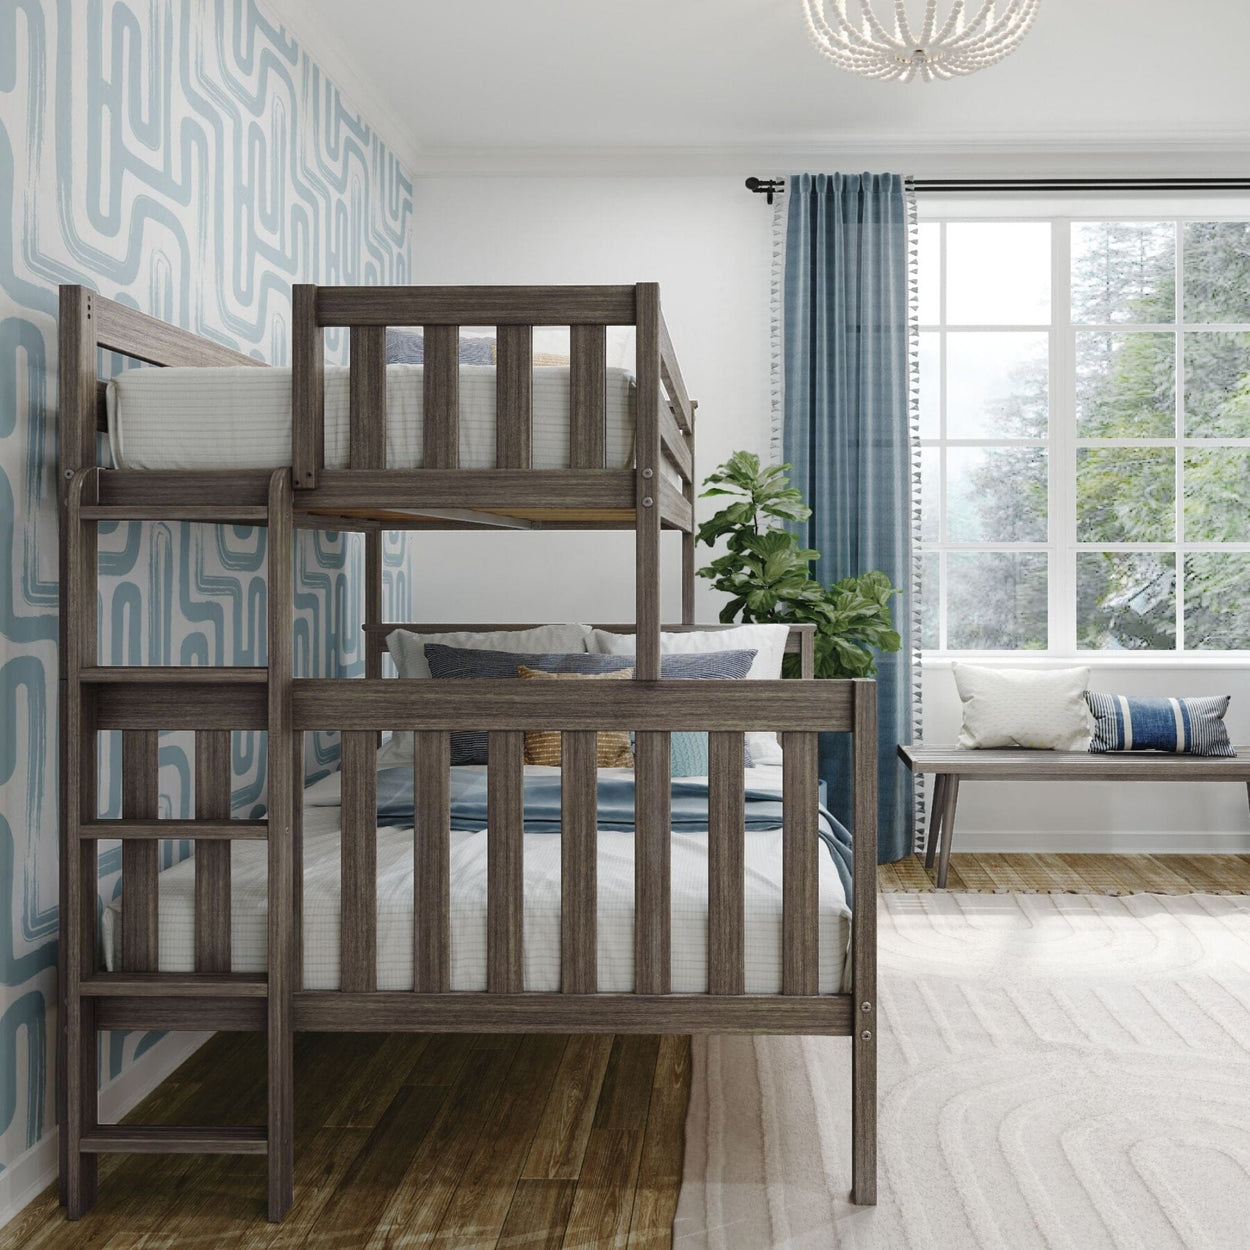 185335-151 : Bunk Beds Twin over Full Bunk Bed with Ladder on End, Clay